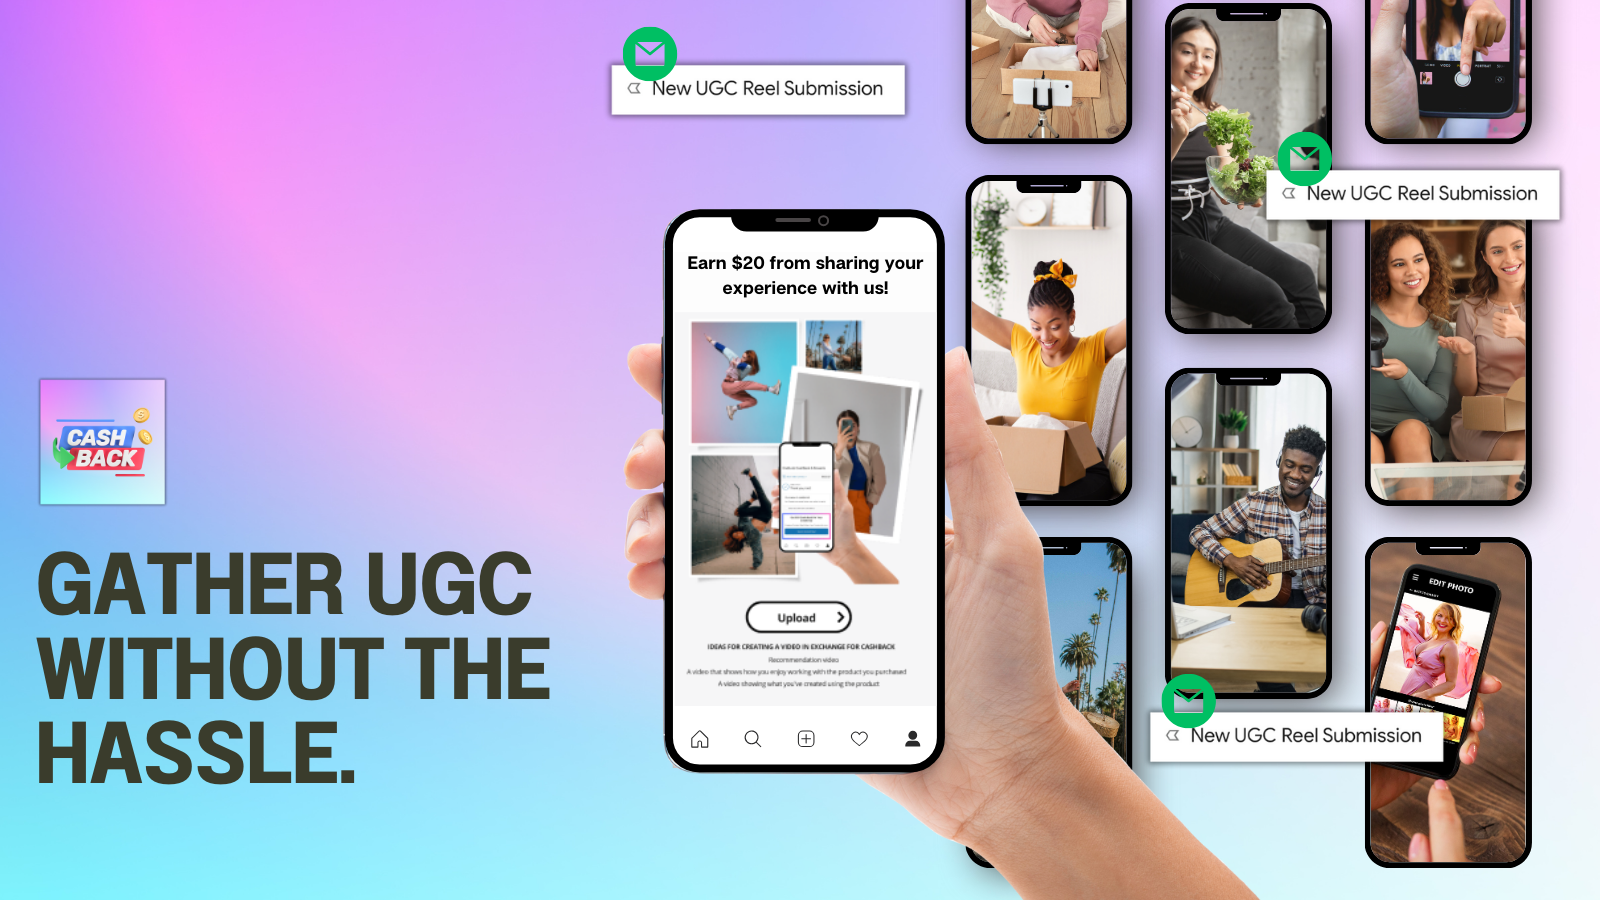 Gather UGC without the hassle.